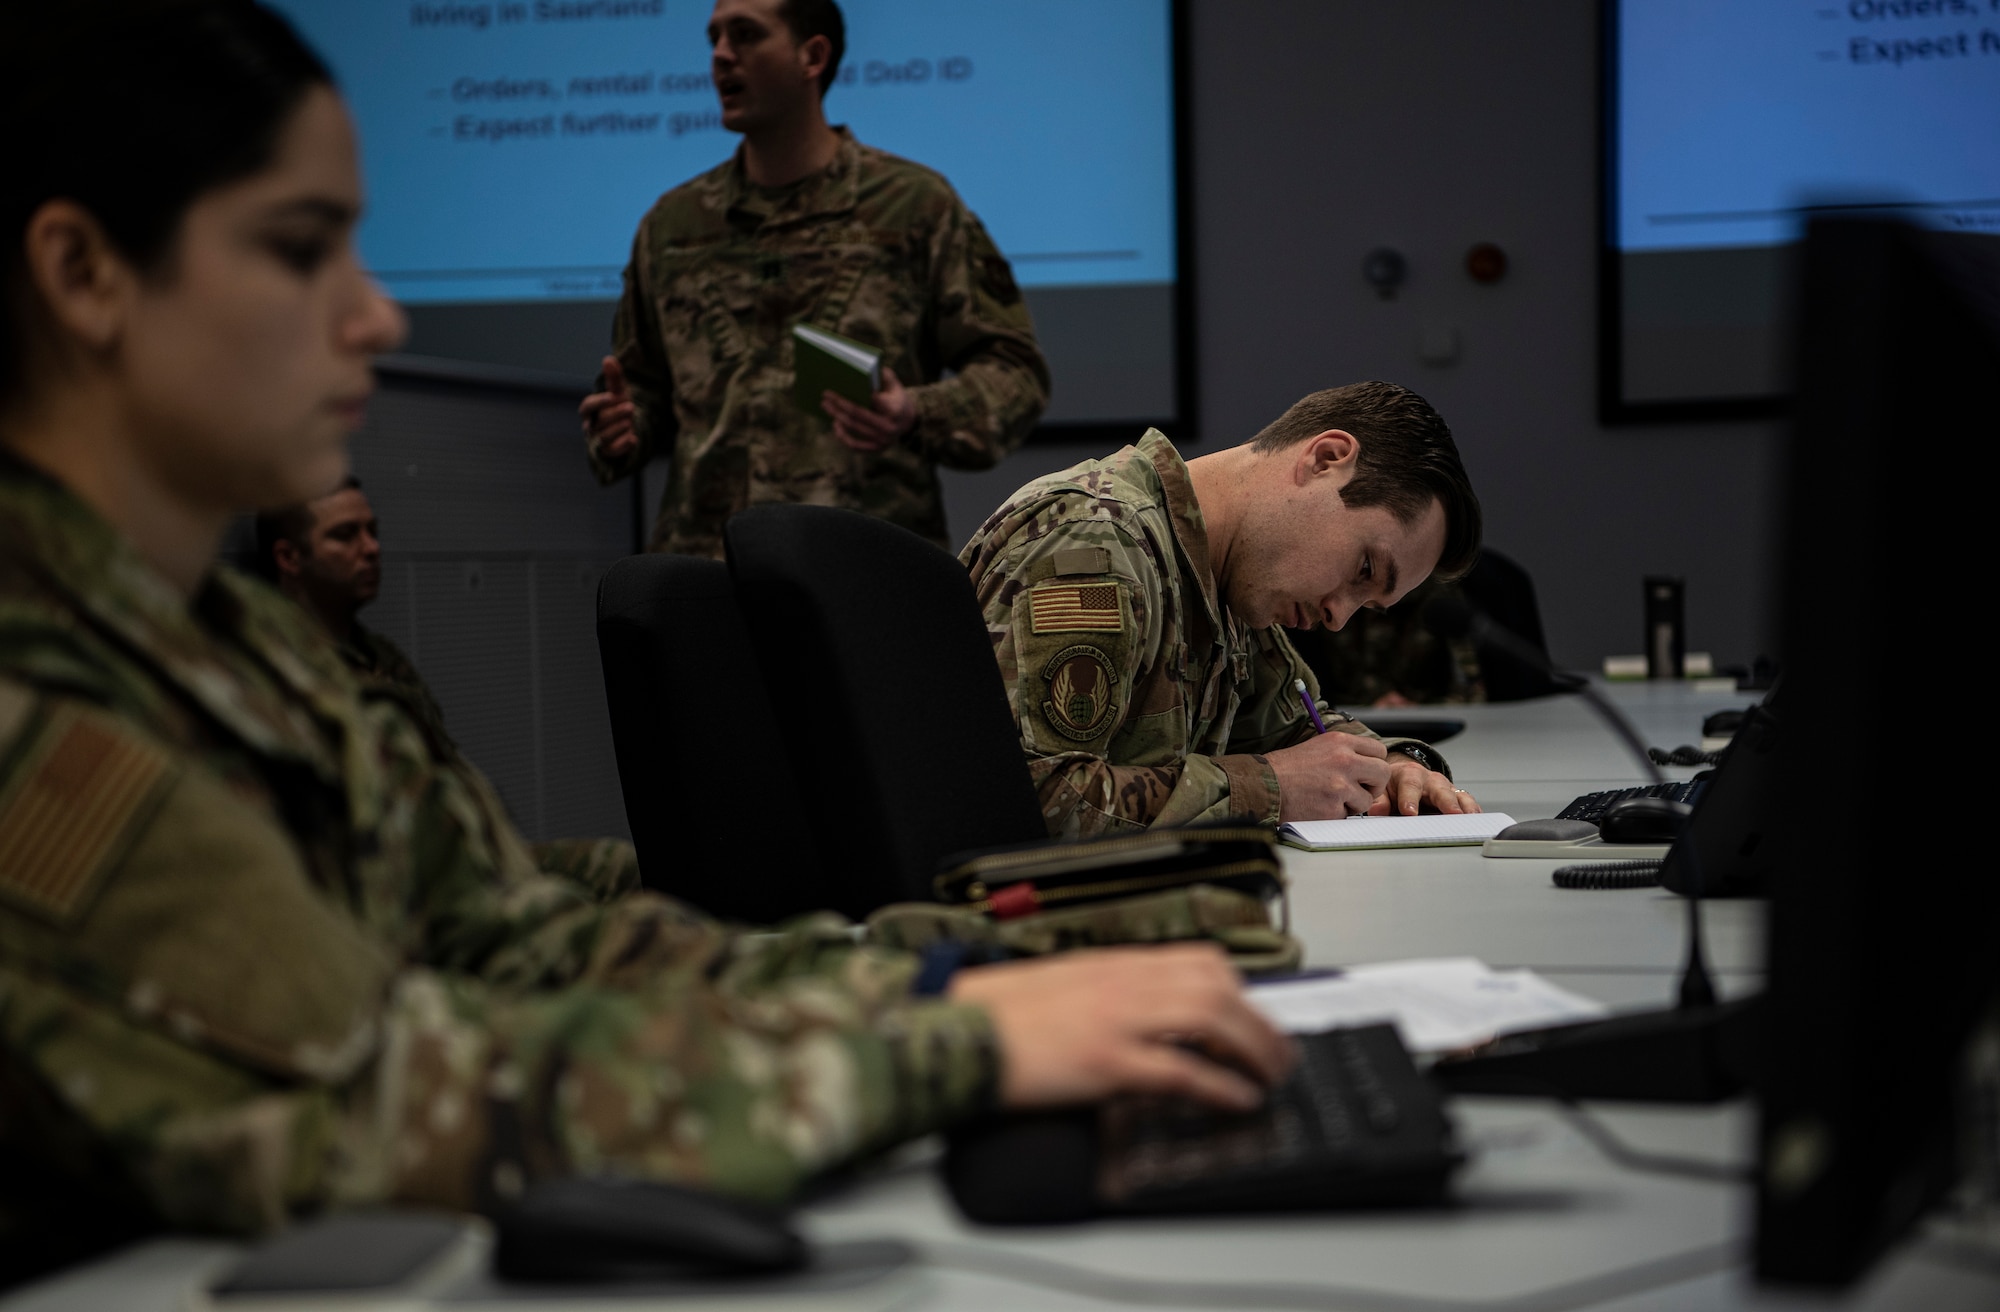 Subject matter experts from across Ramstein Air Base attend an Operational Planning Team meeting March 24, 2020.